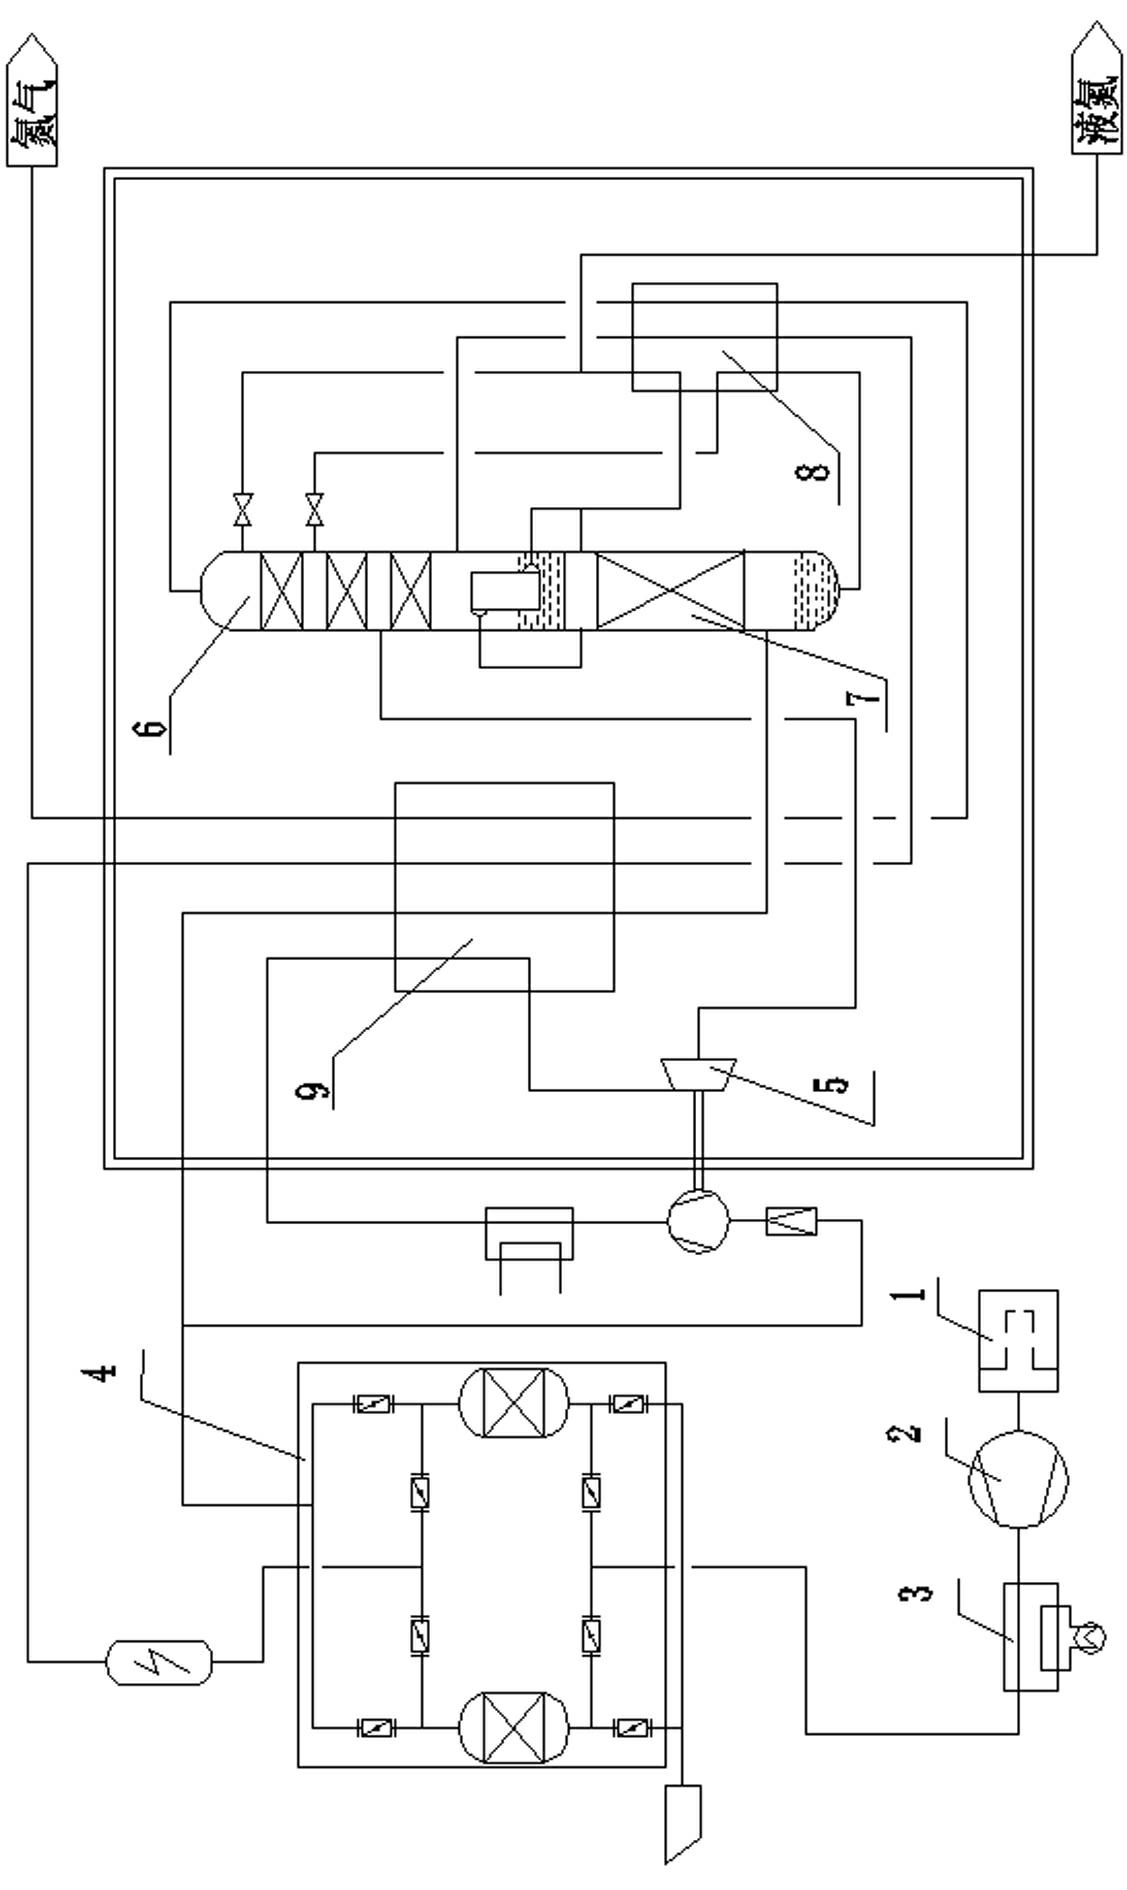 Process for making nitrogen by air separation or making nitrogen and simultaneously producing oxygen in attached manner